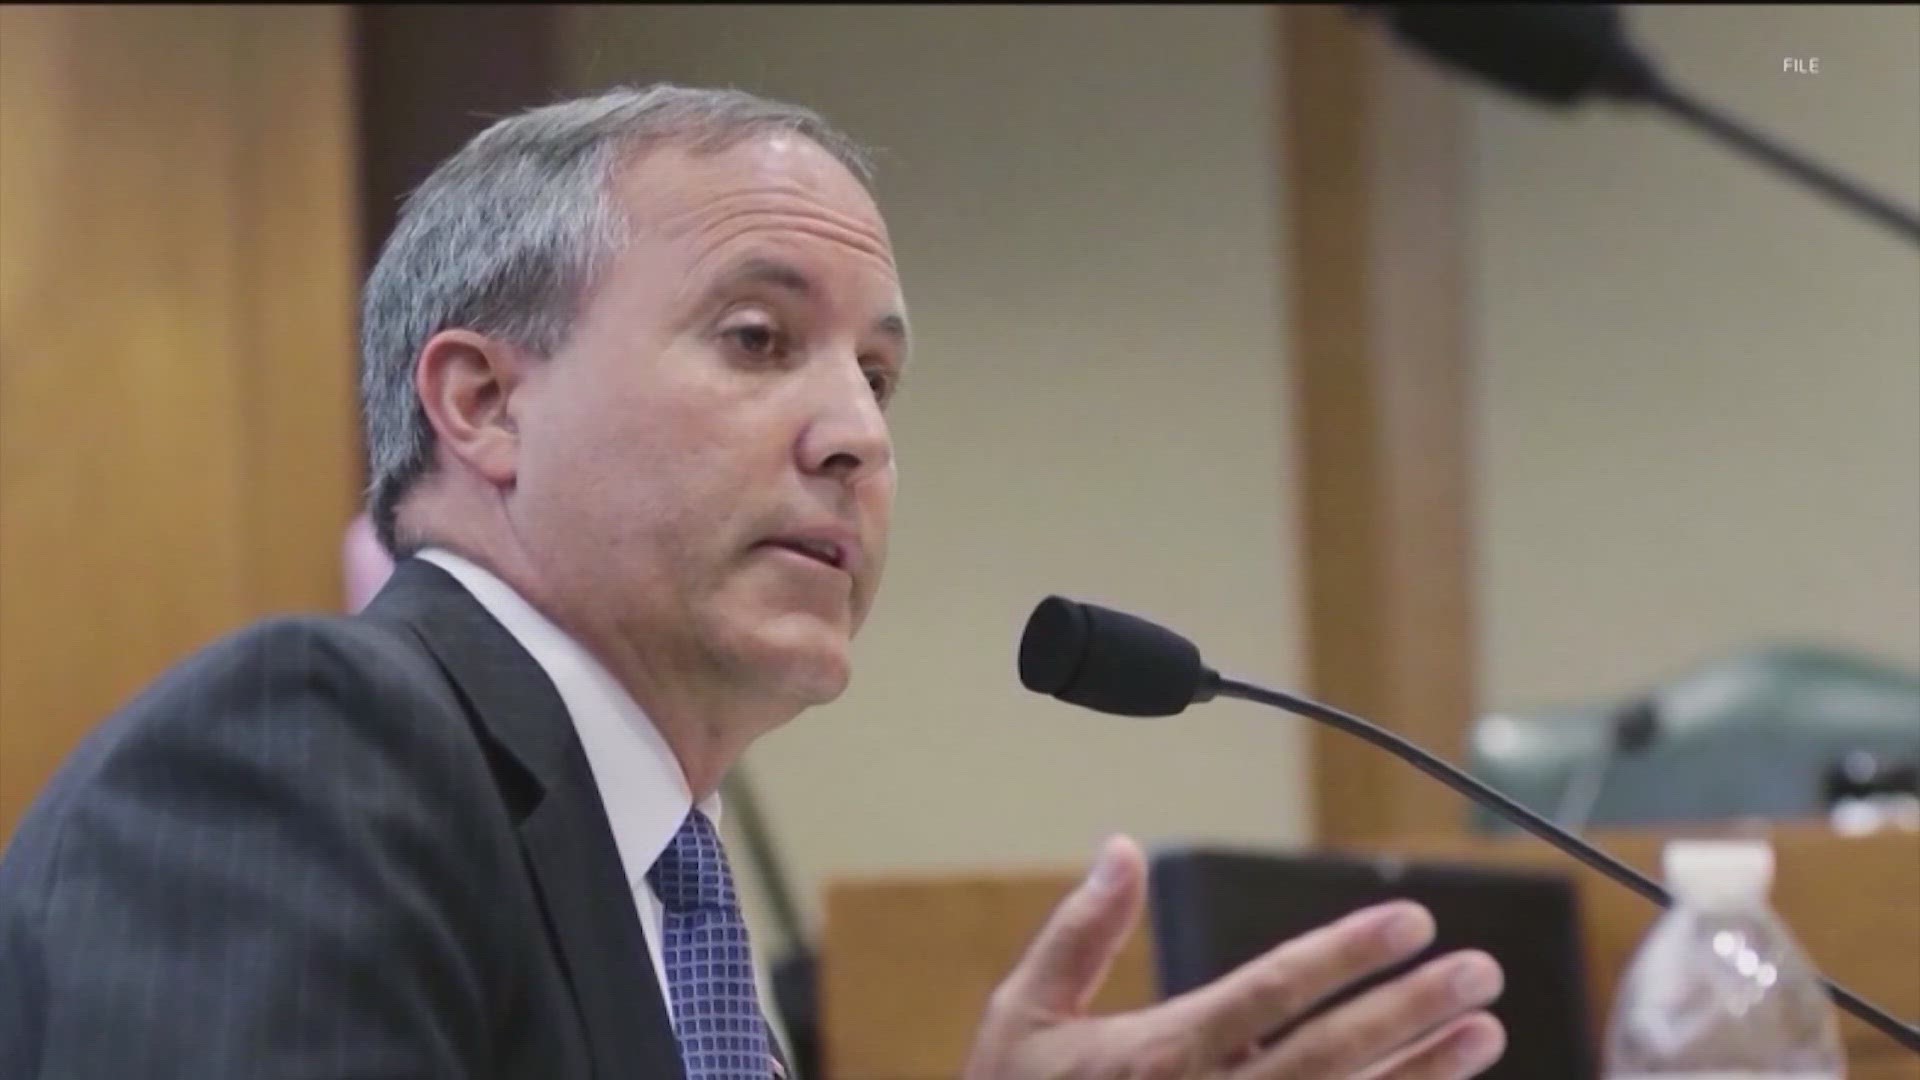 The Texas Court of Appeals denied Attorney General Ken Paxton's appeal to keep him from testifying in an FBI whistleblower case.